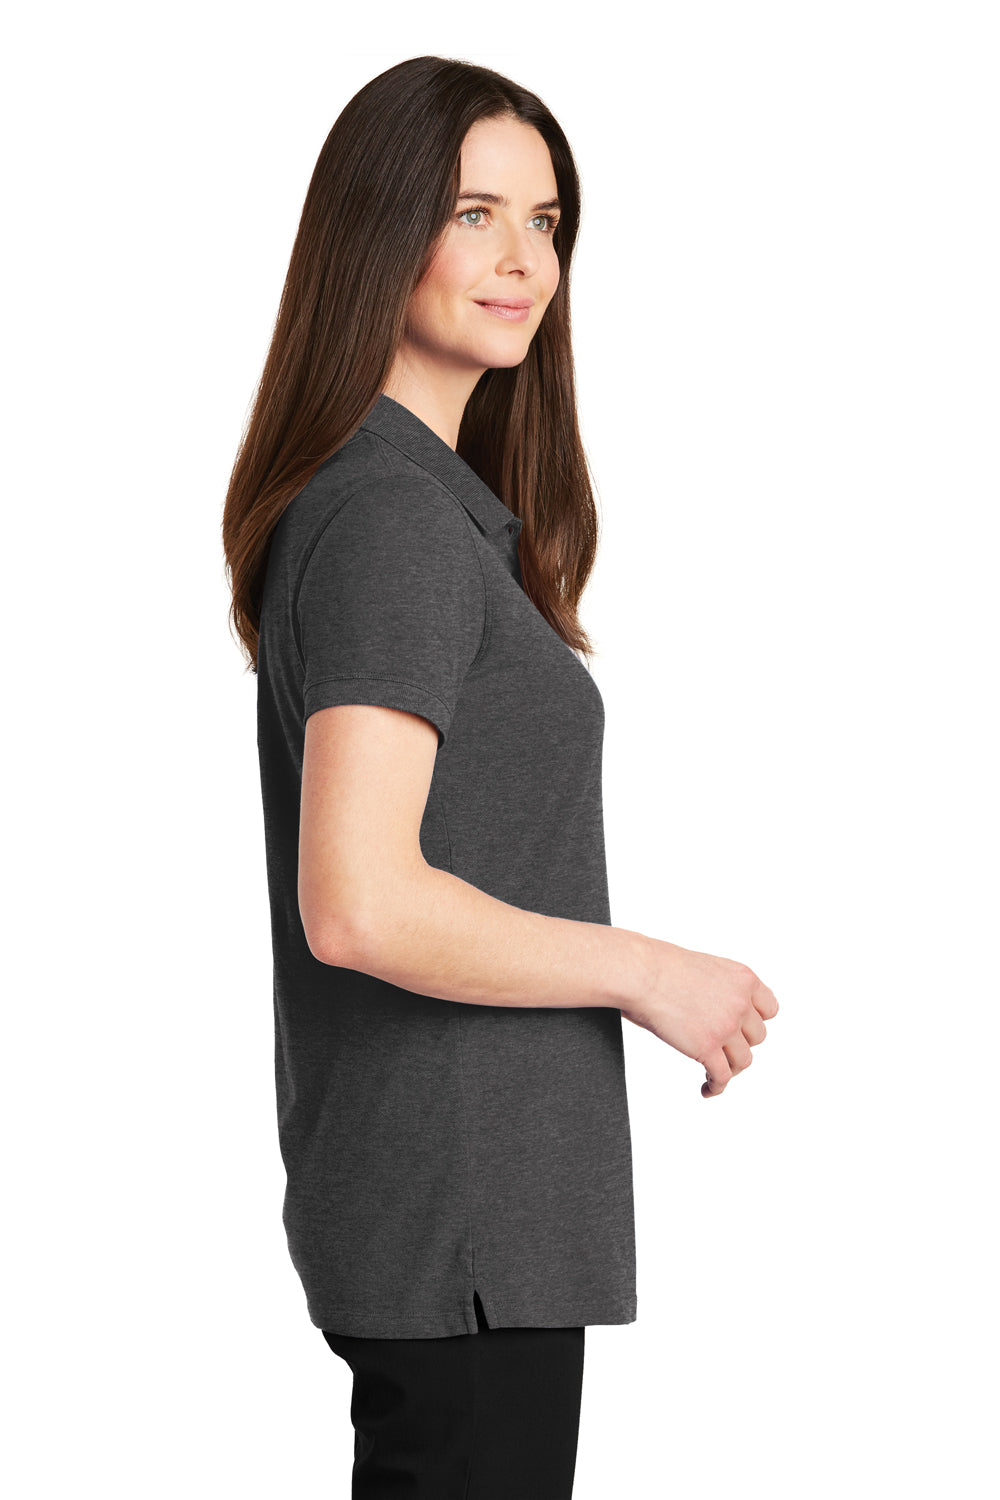 Port Authority LK8000 Womens Wrinkle Resistant Short Sleeve Polo Shirt Heather Charcoal Grey Side